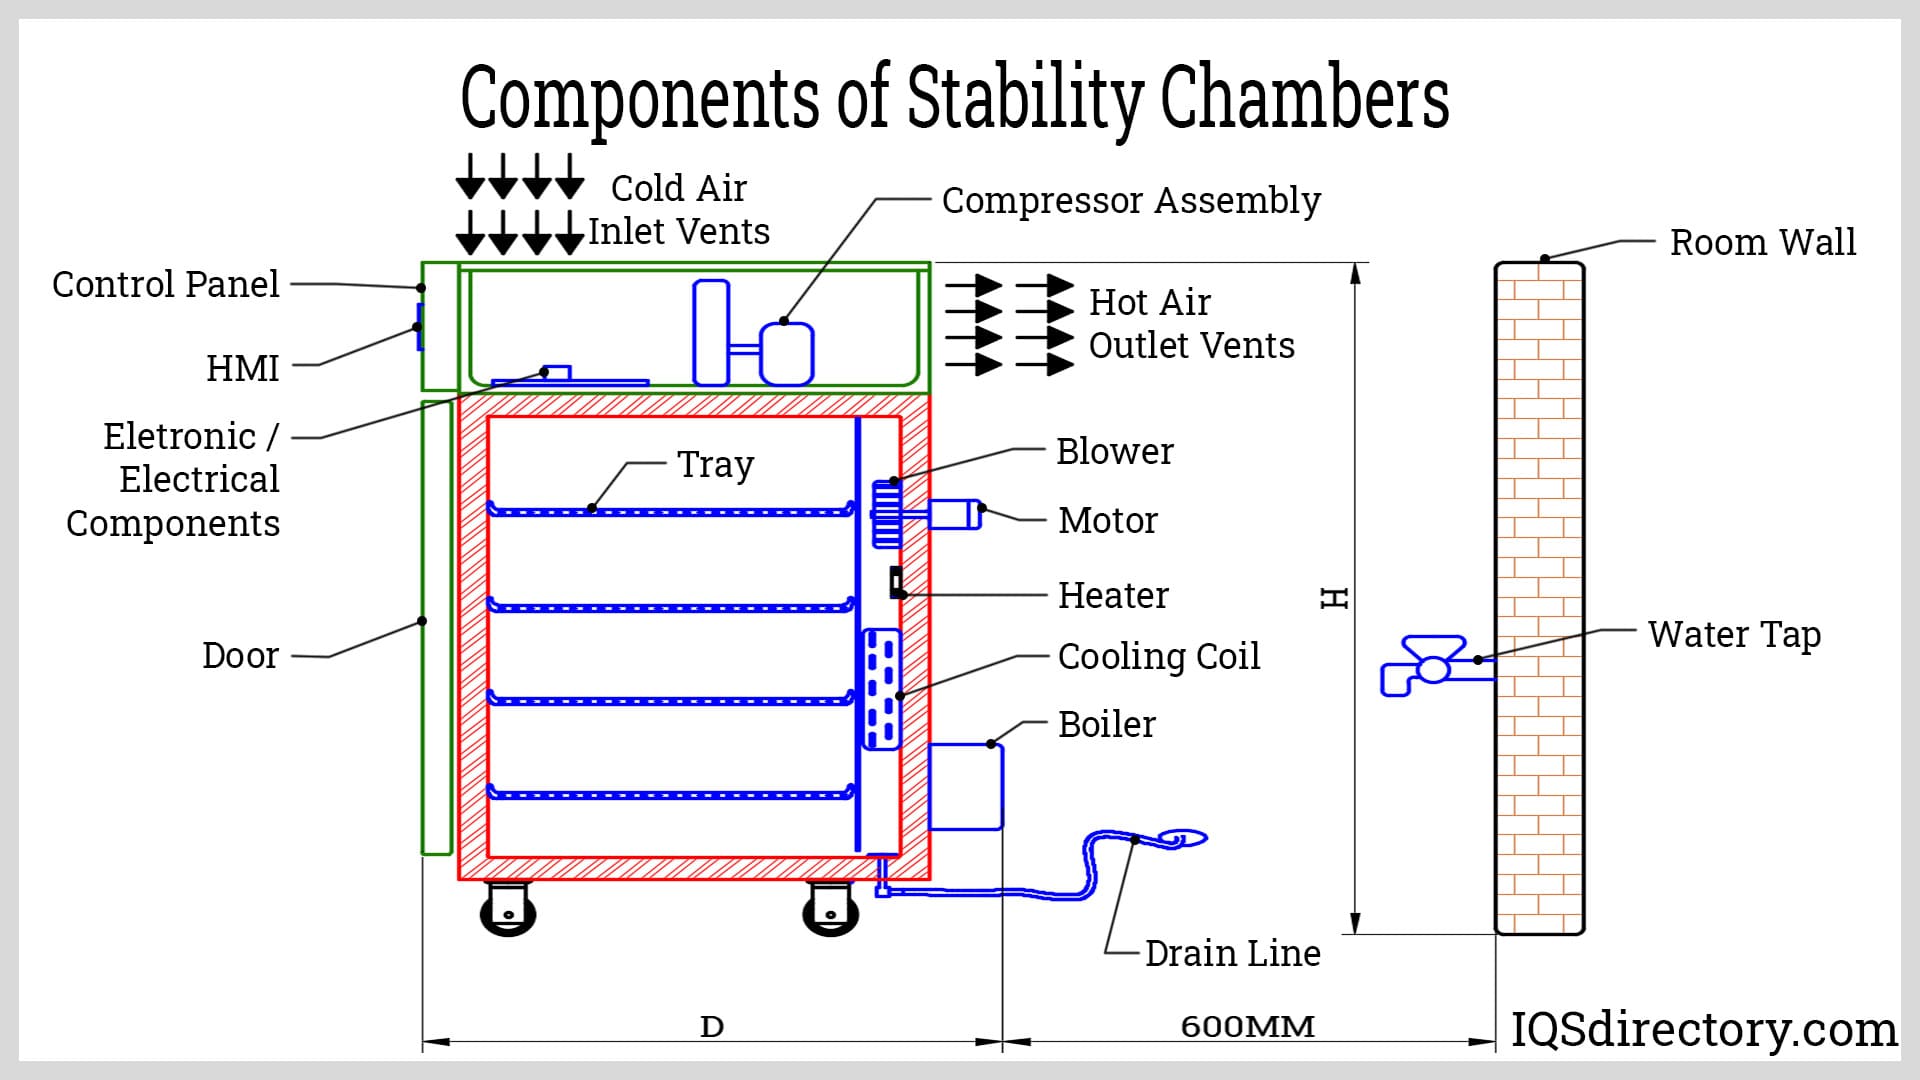 Components of Stability Chambers